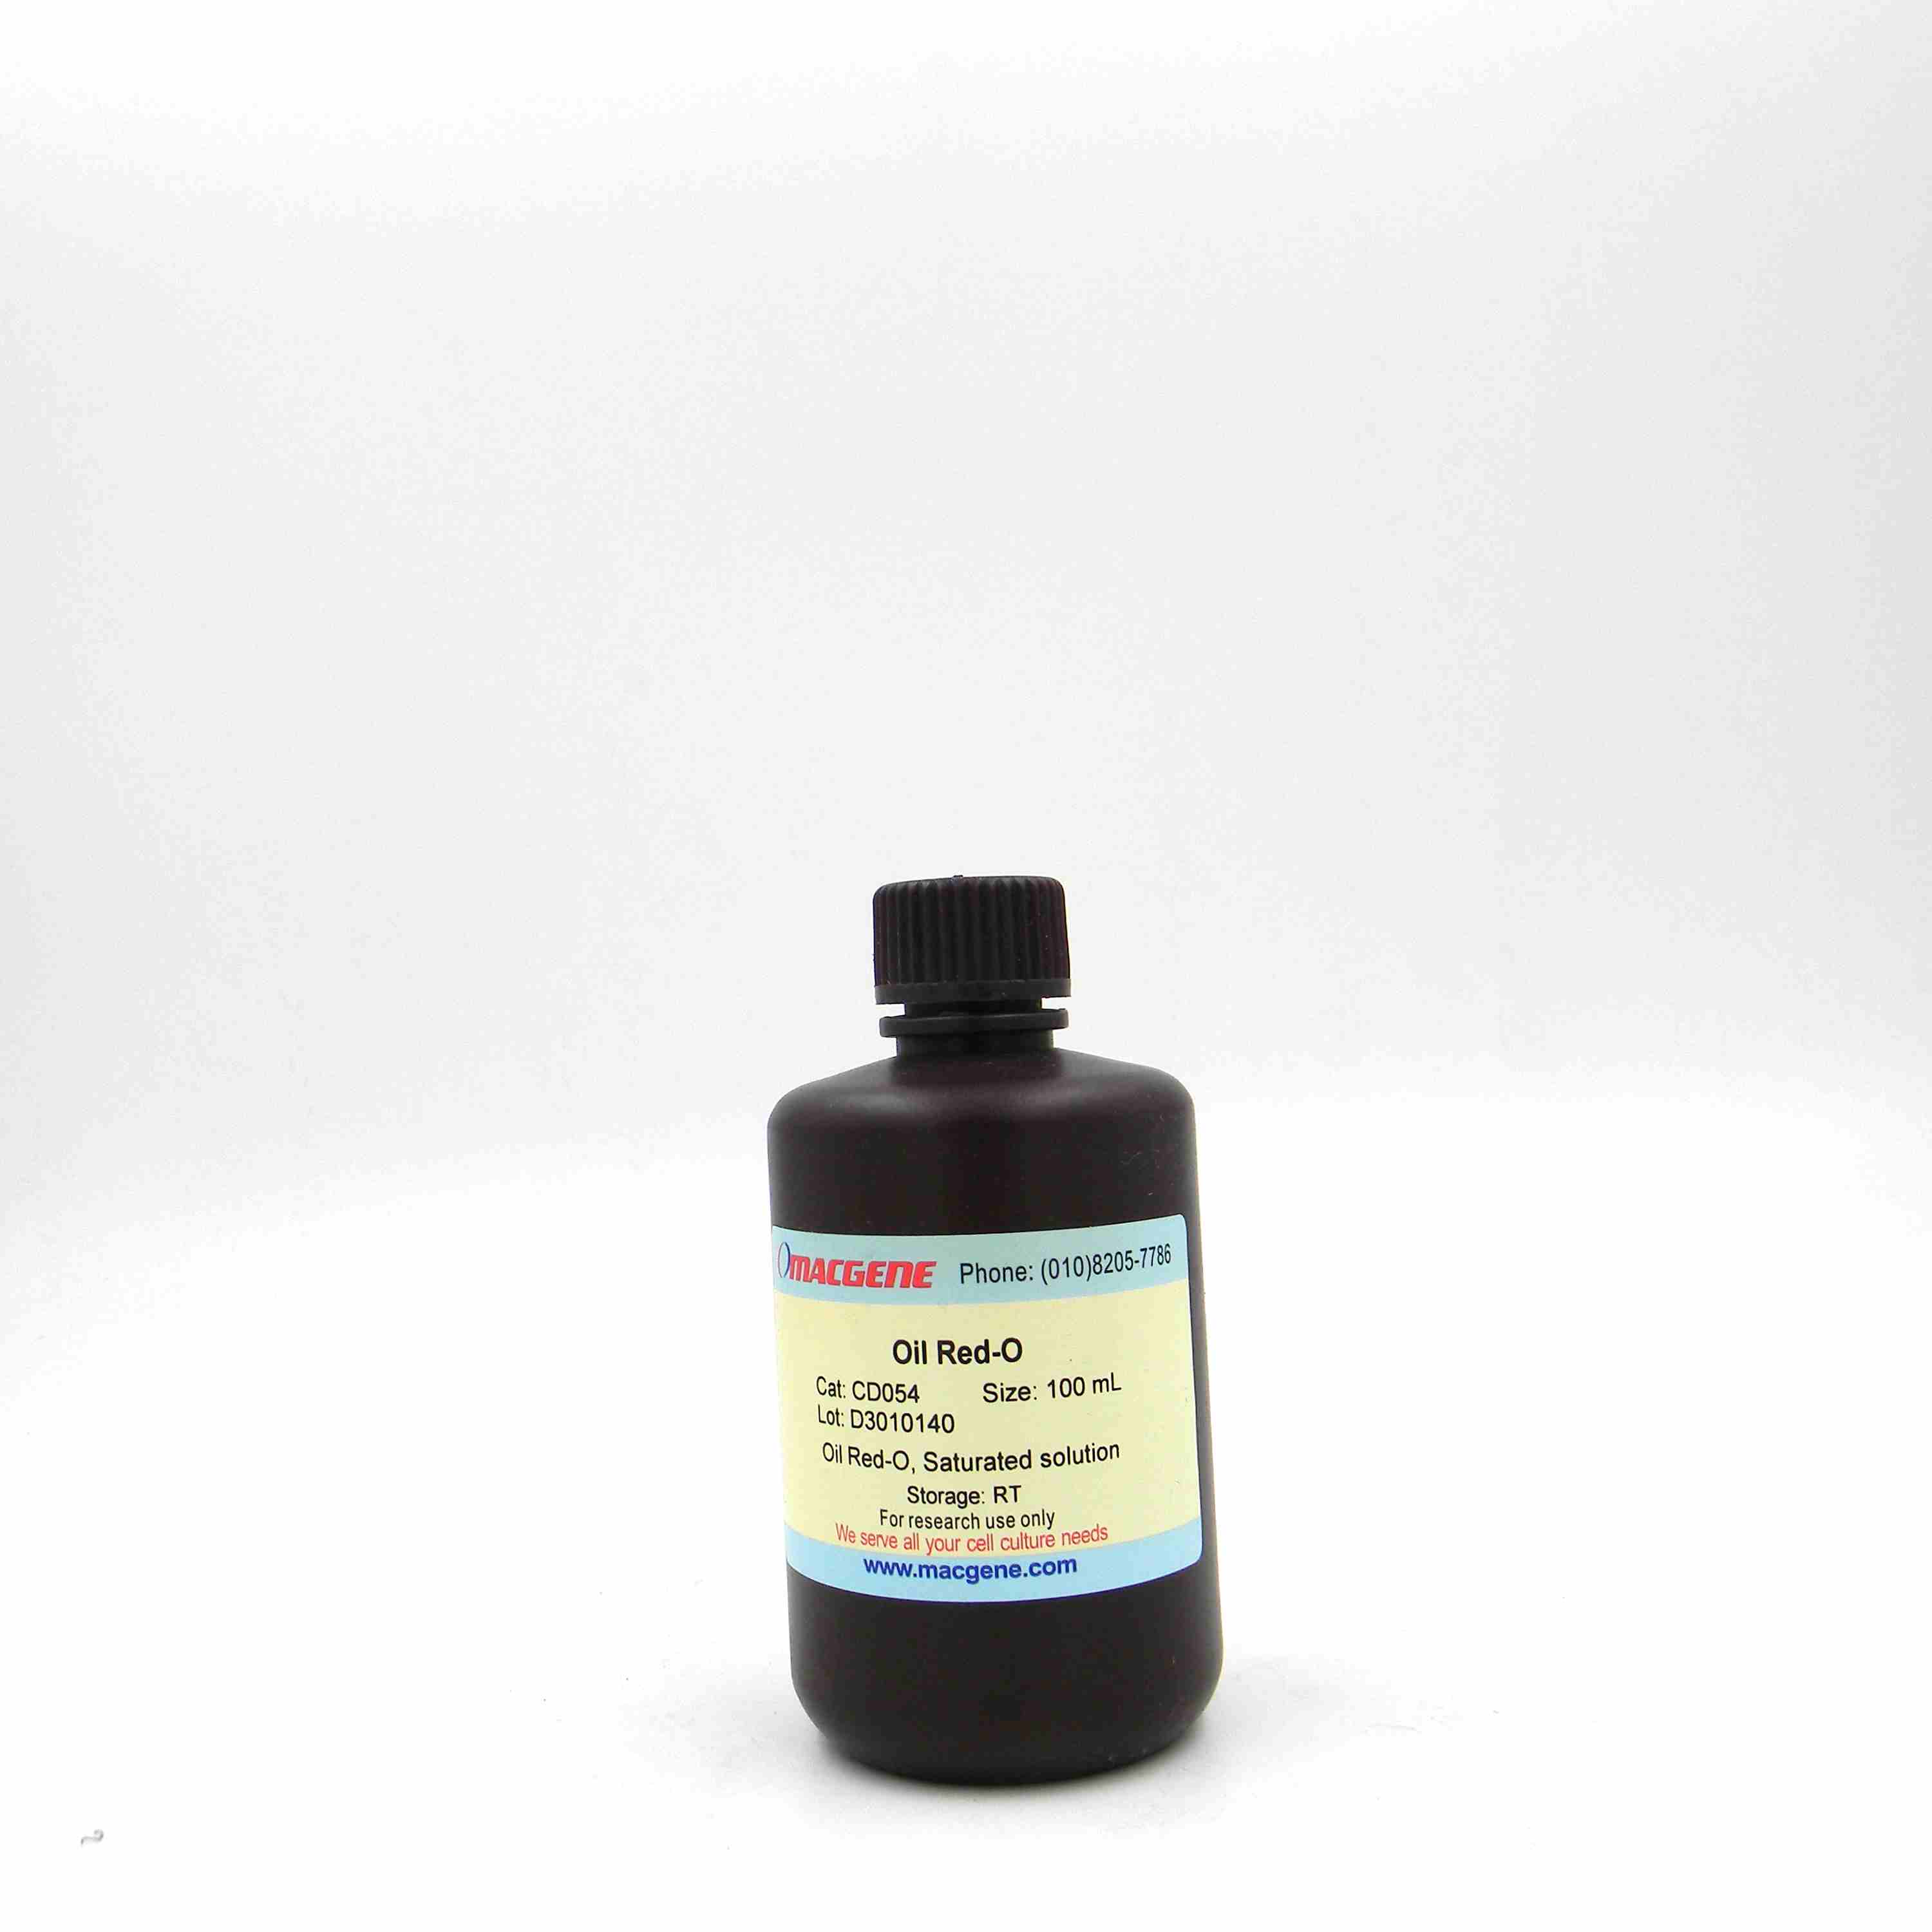 Oil Red-O, Saturated Isopropanol Solution